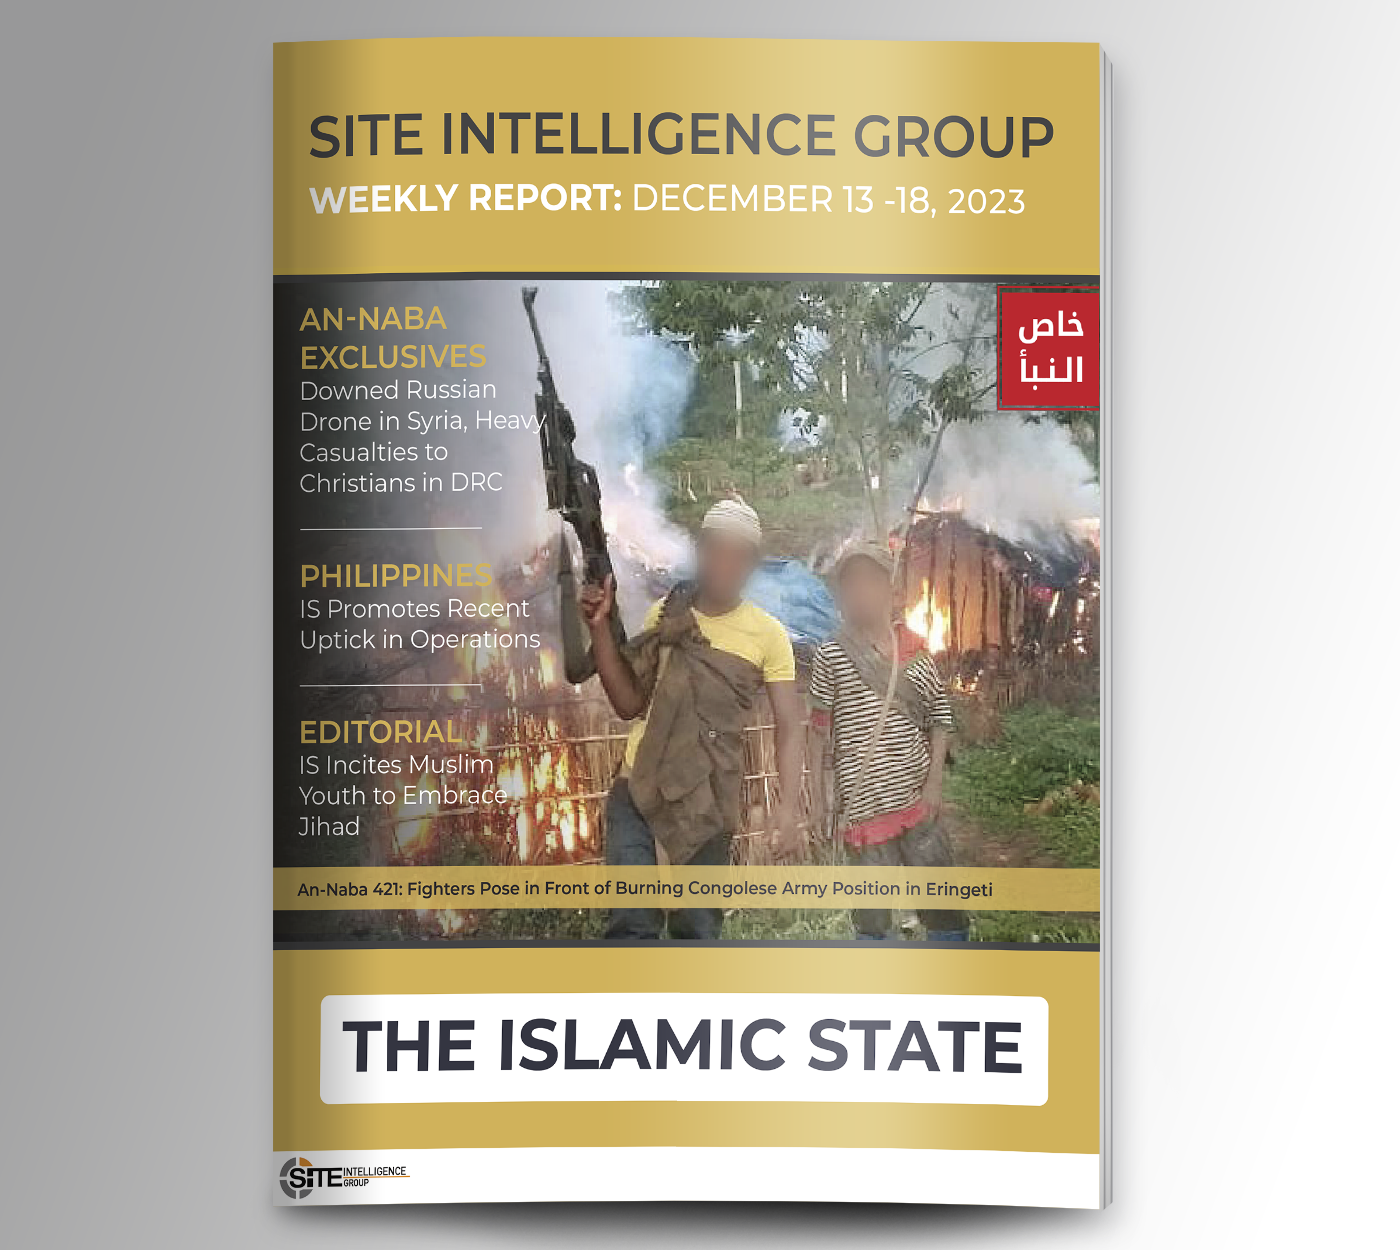 Weekly inSITE on the Islamic State for December 13-19, 2023